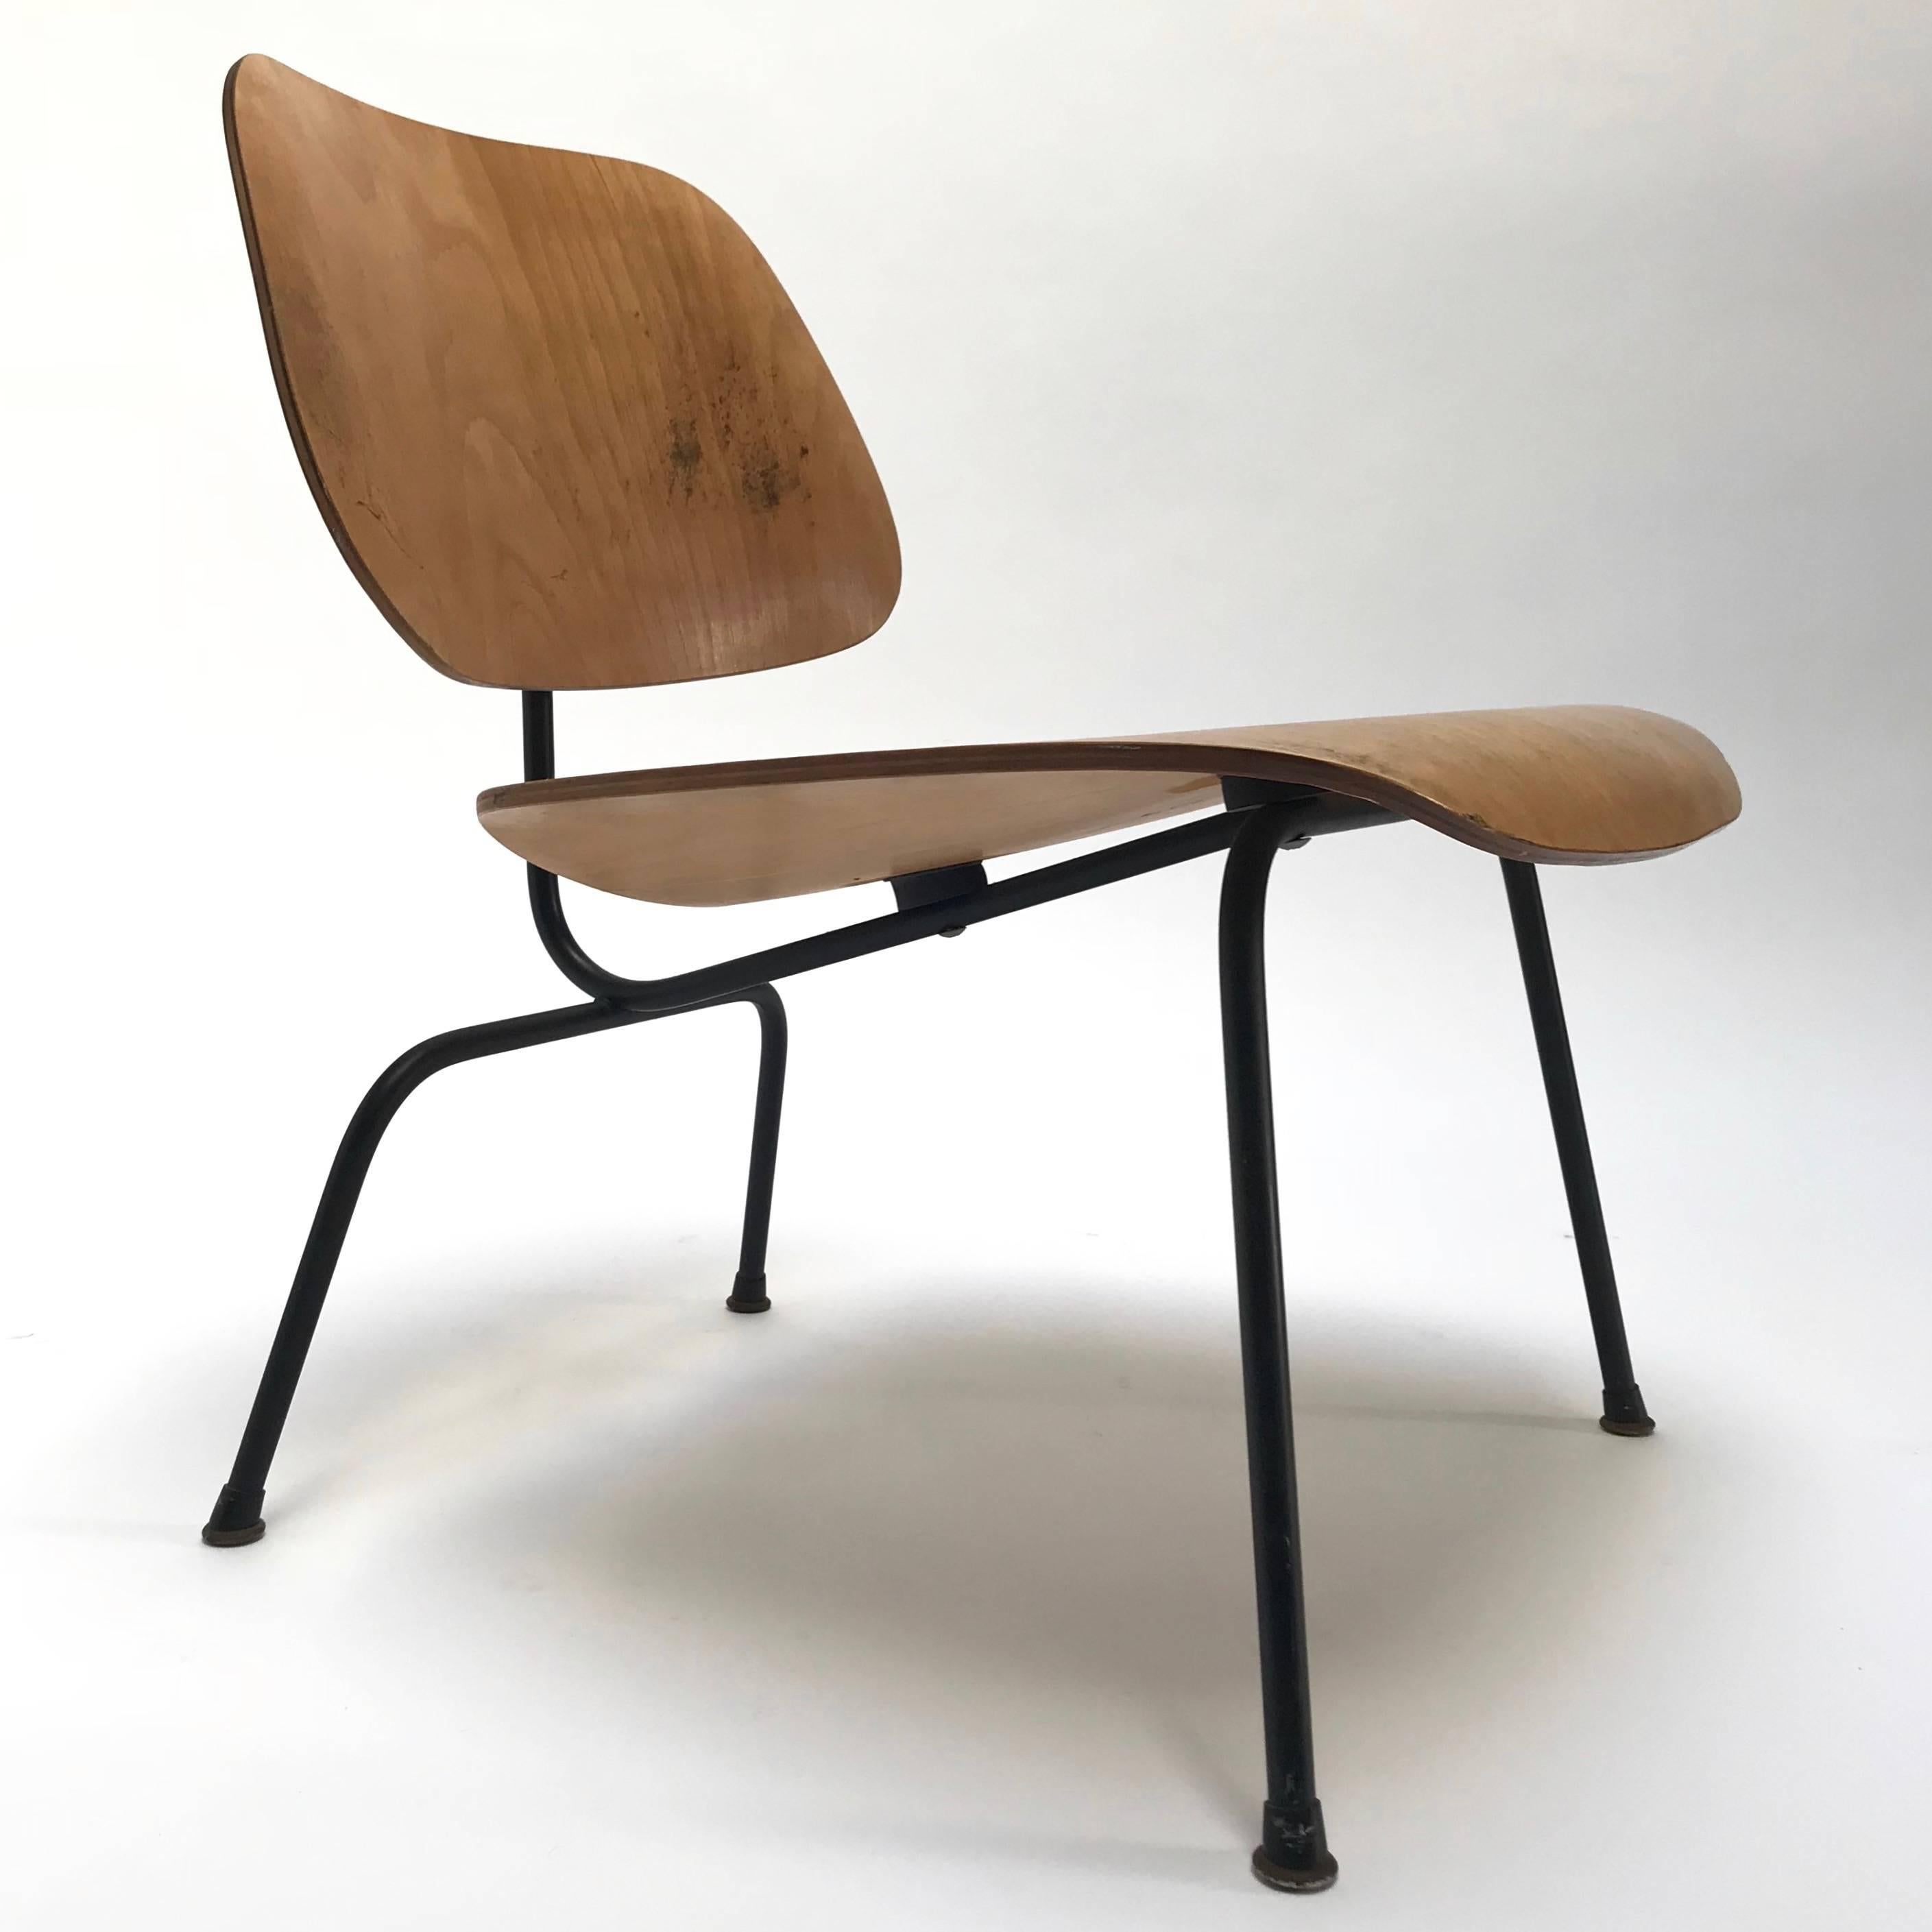 A all original LCM (“Lounge Chair with Metal base”) chair in birch by Charles and Ray Eames for Herman Miller, circa 1952.

Birch veneer over molded plywood seat on matte black steel base. Original and complete hardware, early boot glides, and